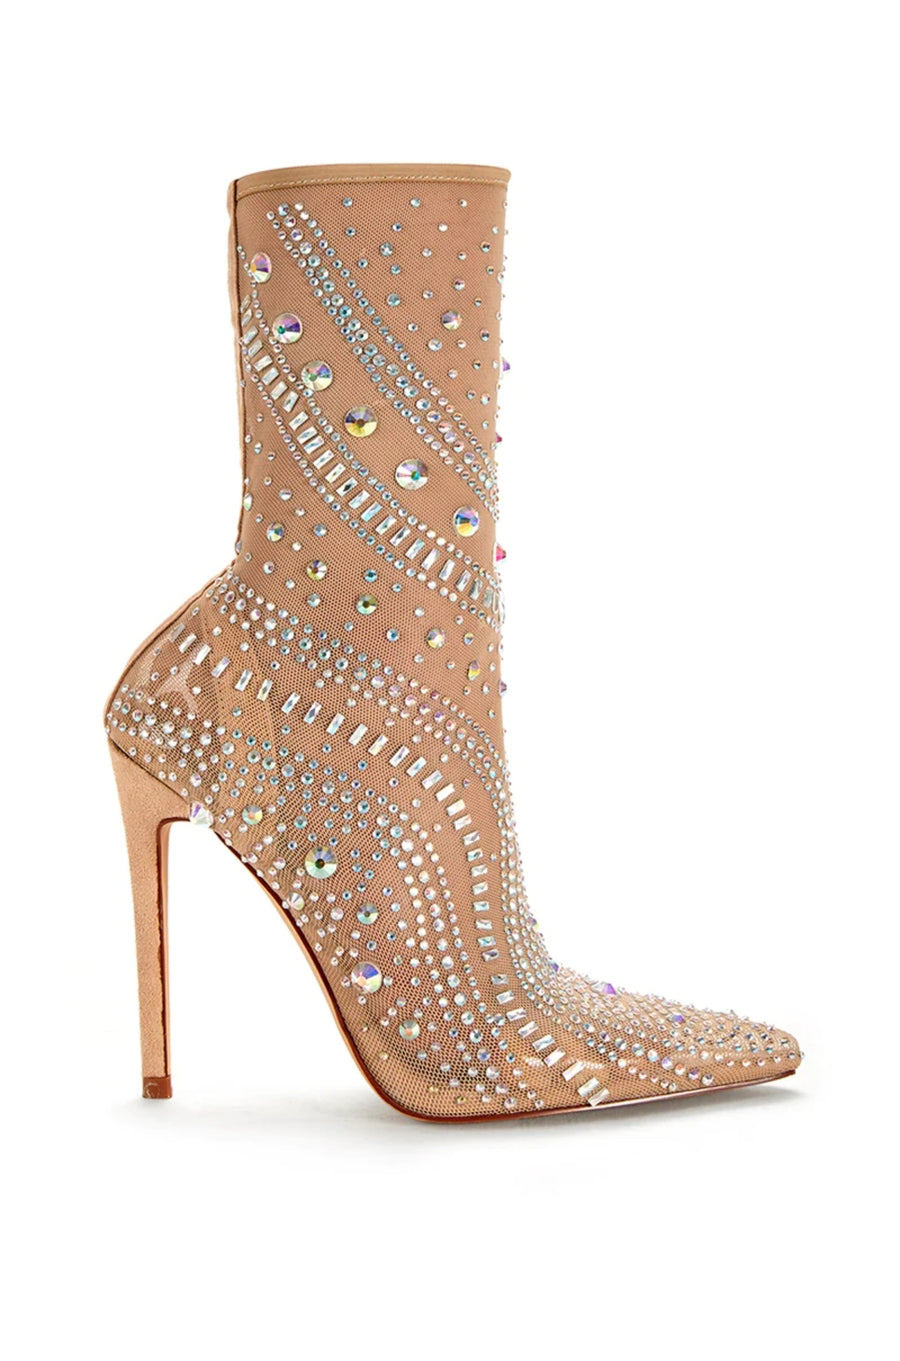 nude stretchy pointed toe stiletto heel boots with rhinestone pattern design